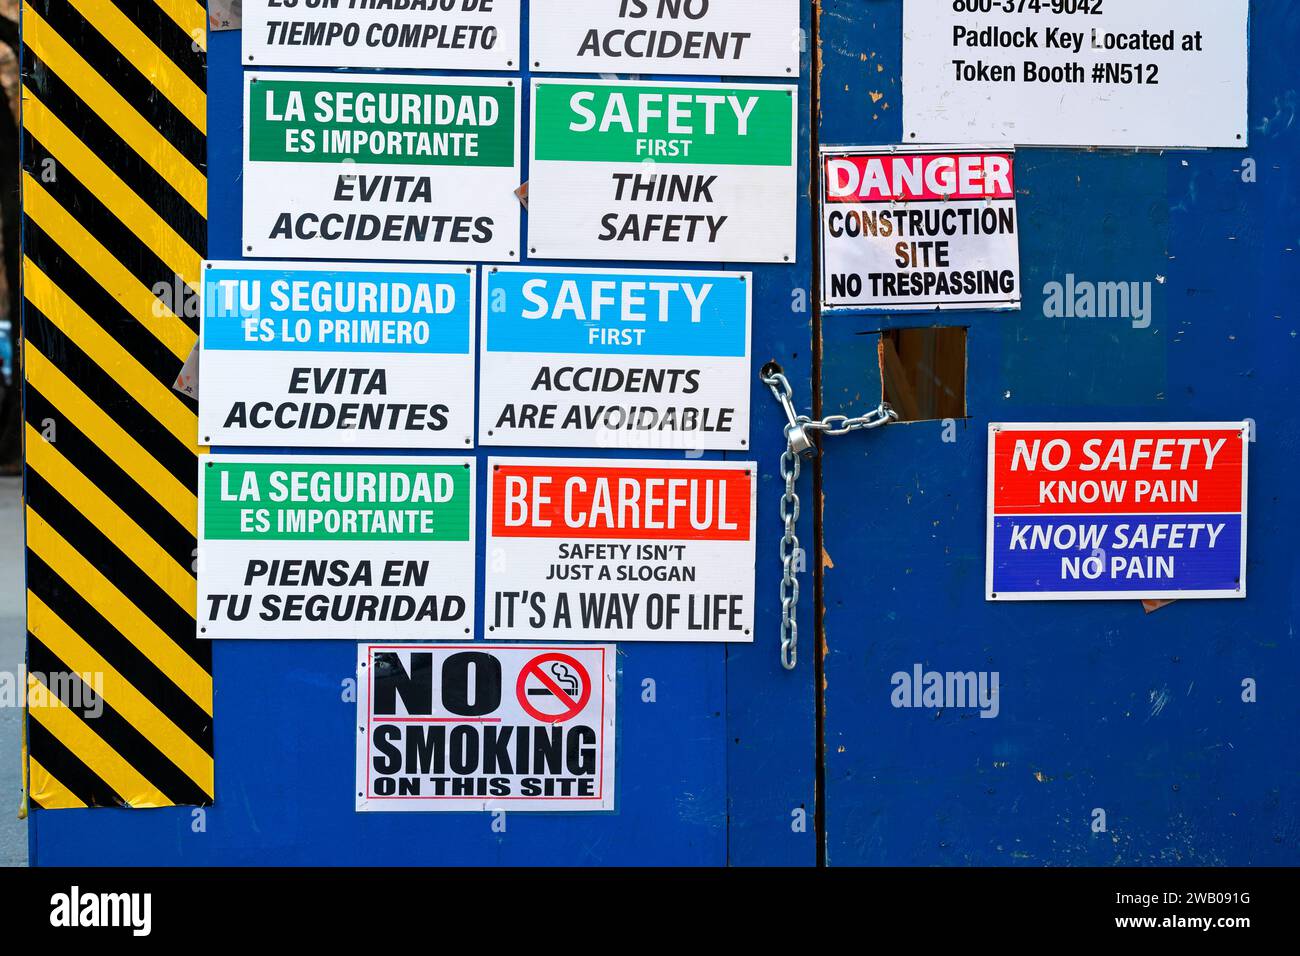 Safety First signage in English and Spanish languages posted by a door to a construction site. Stock Photo